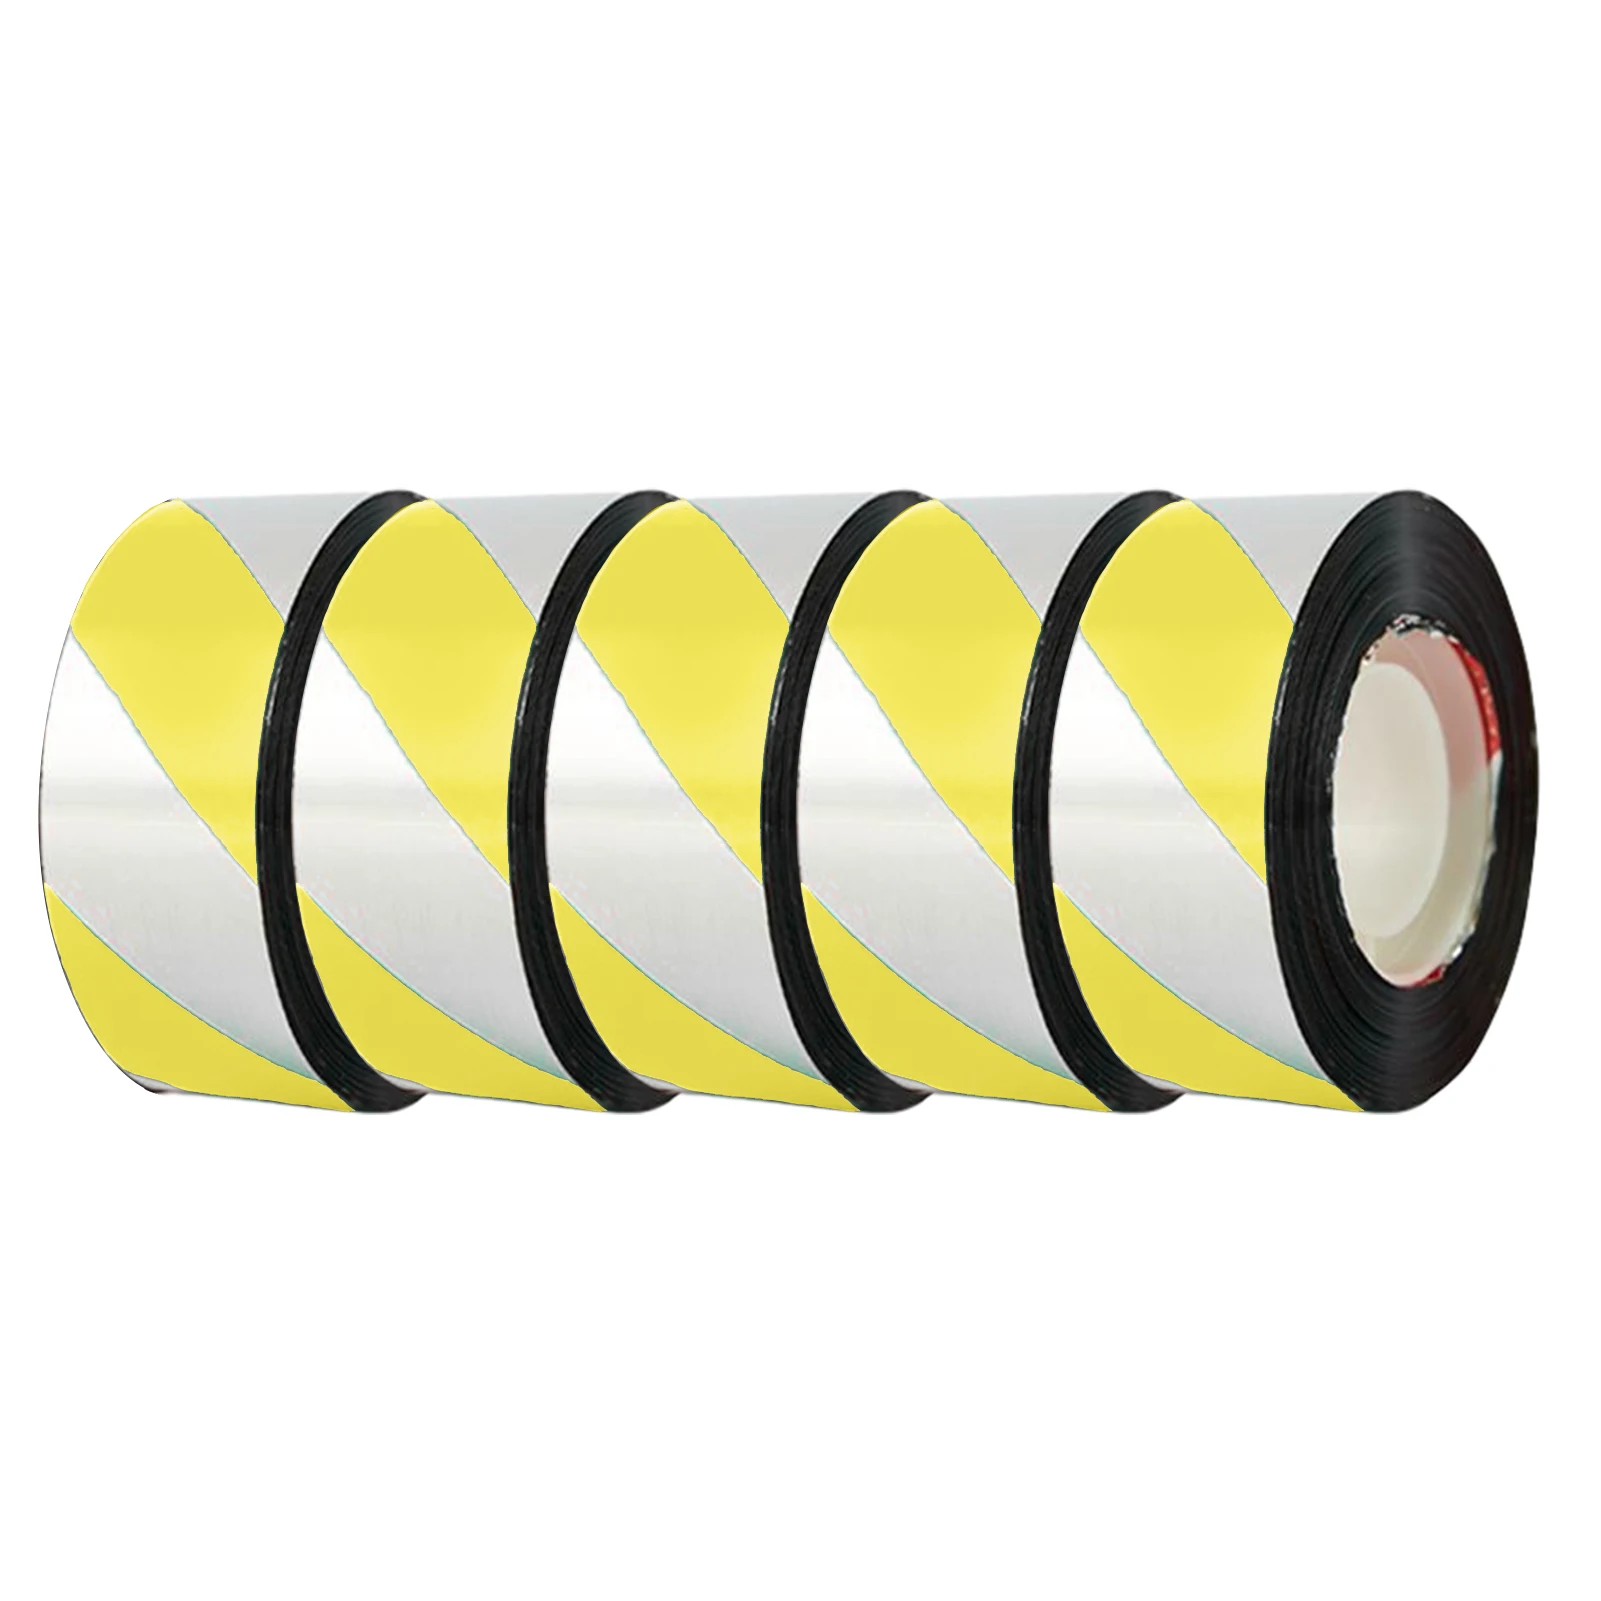 

5 Rolls Bird Repellent Tape Deterrent Reflective 2.5cmx50m For Garden Scare Orchard Outdoor Patio Sparrow Field Double Sided